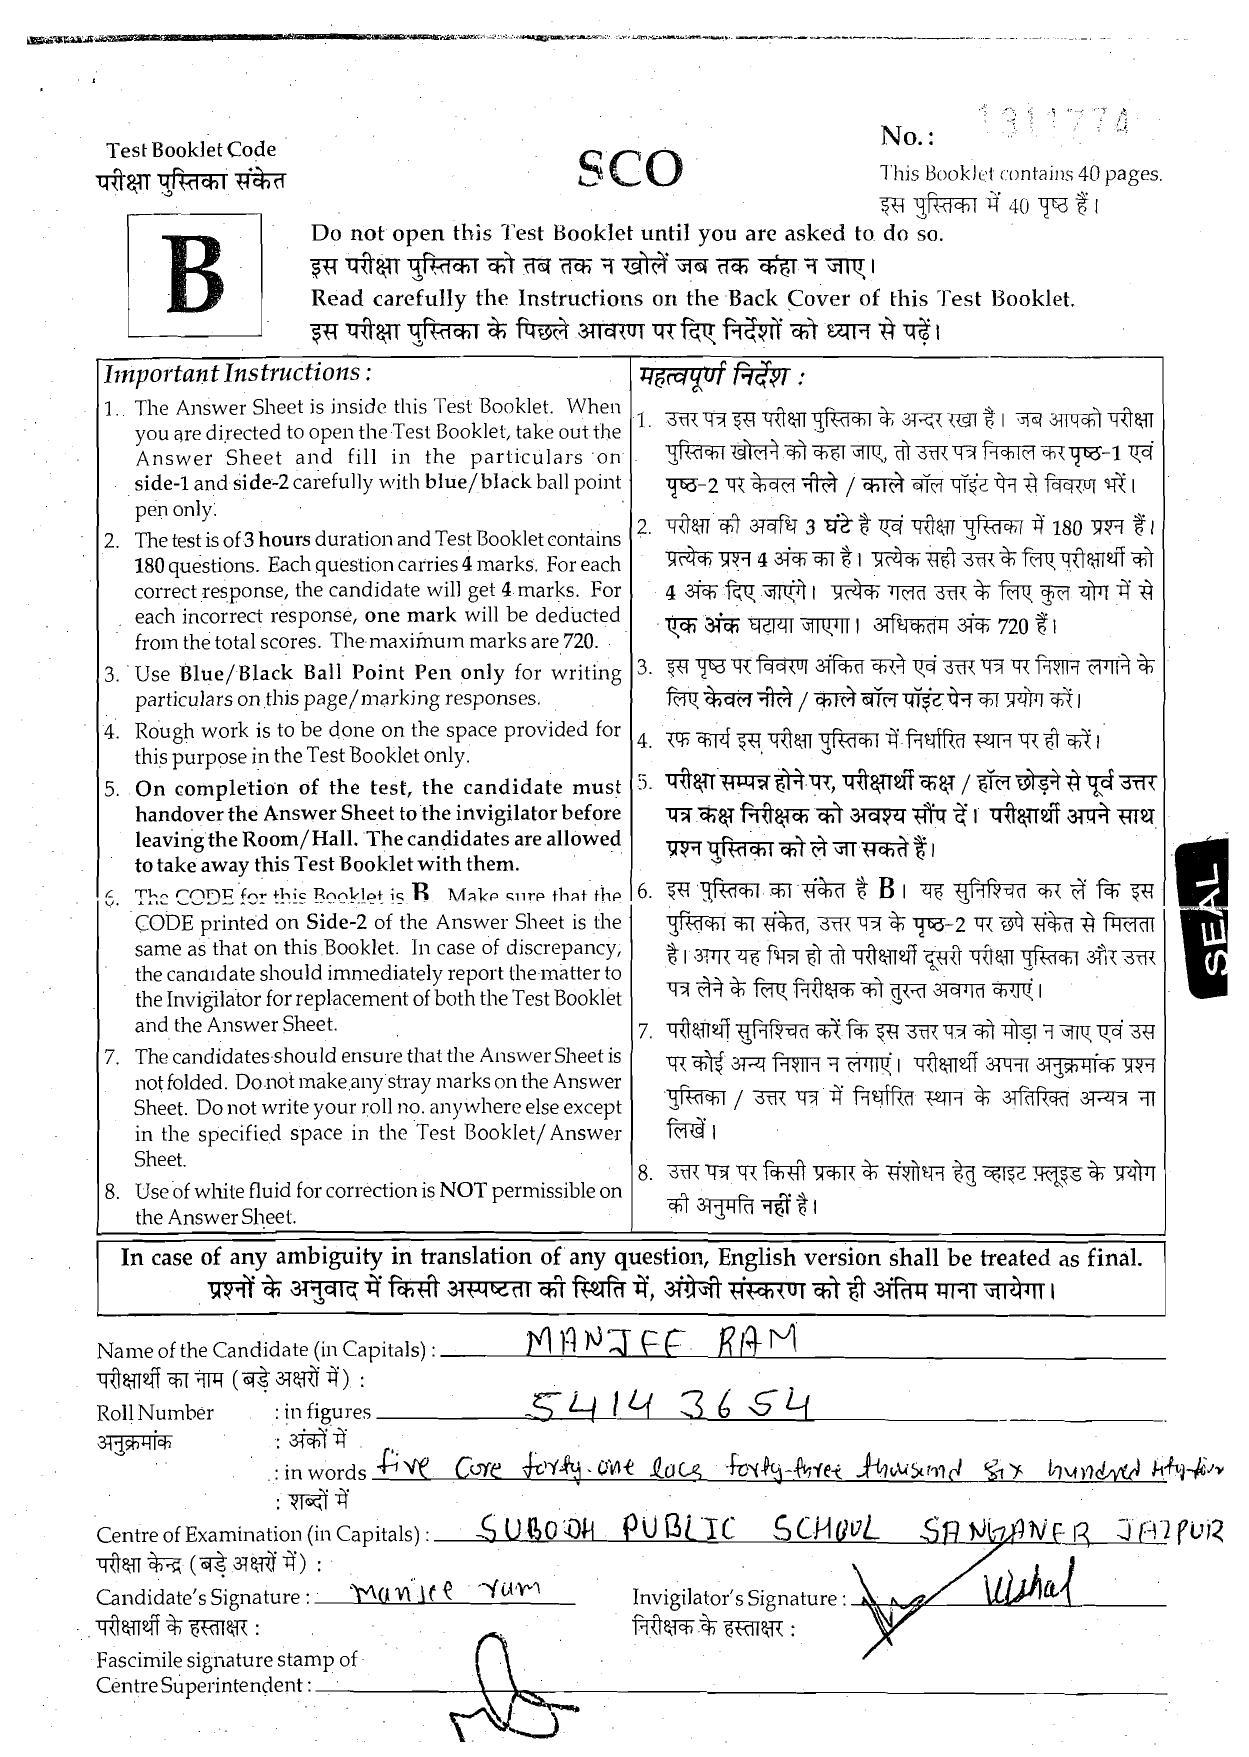 NEET Code B 2015 Question Paper - Page 1